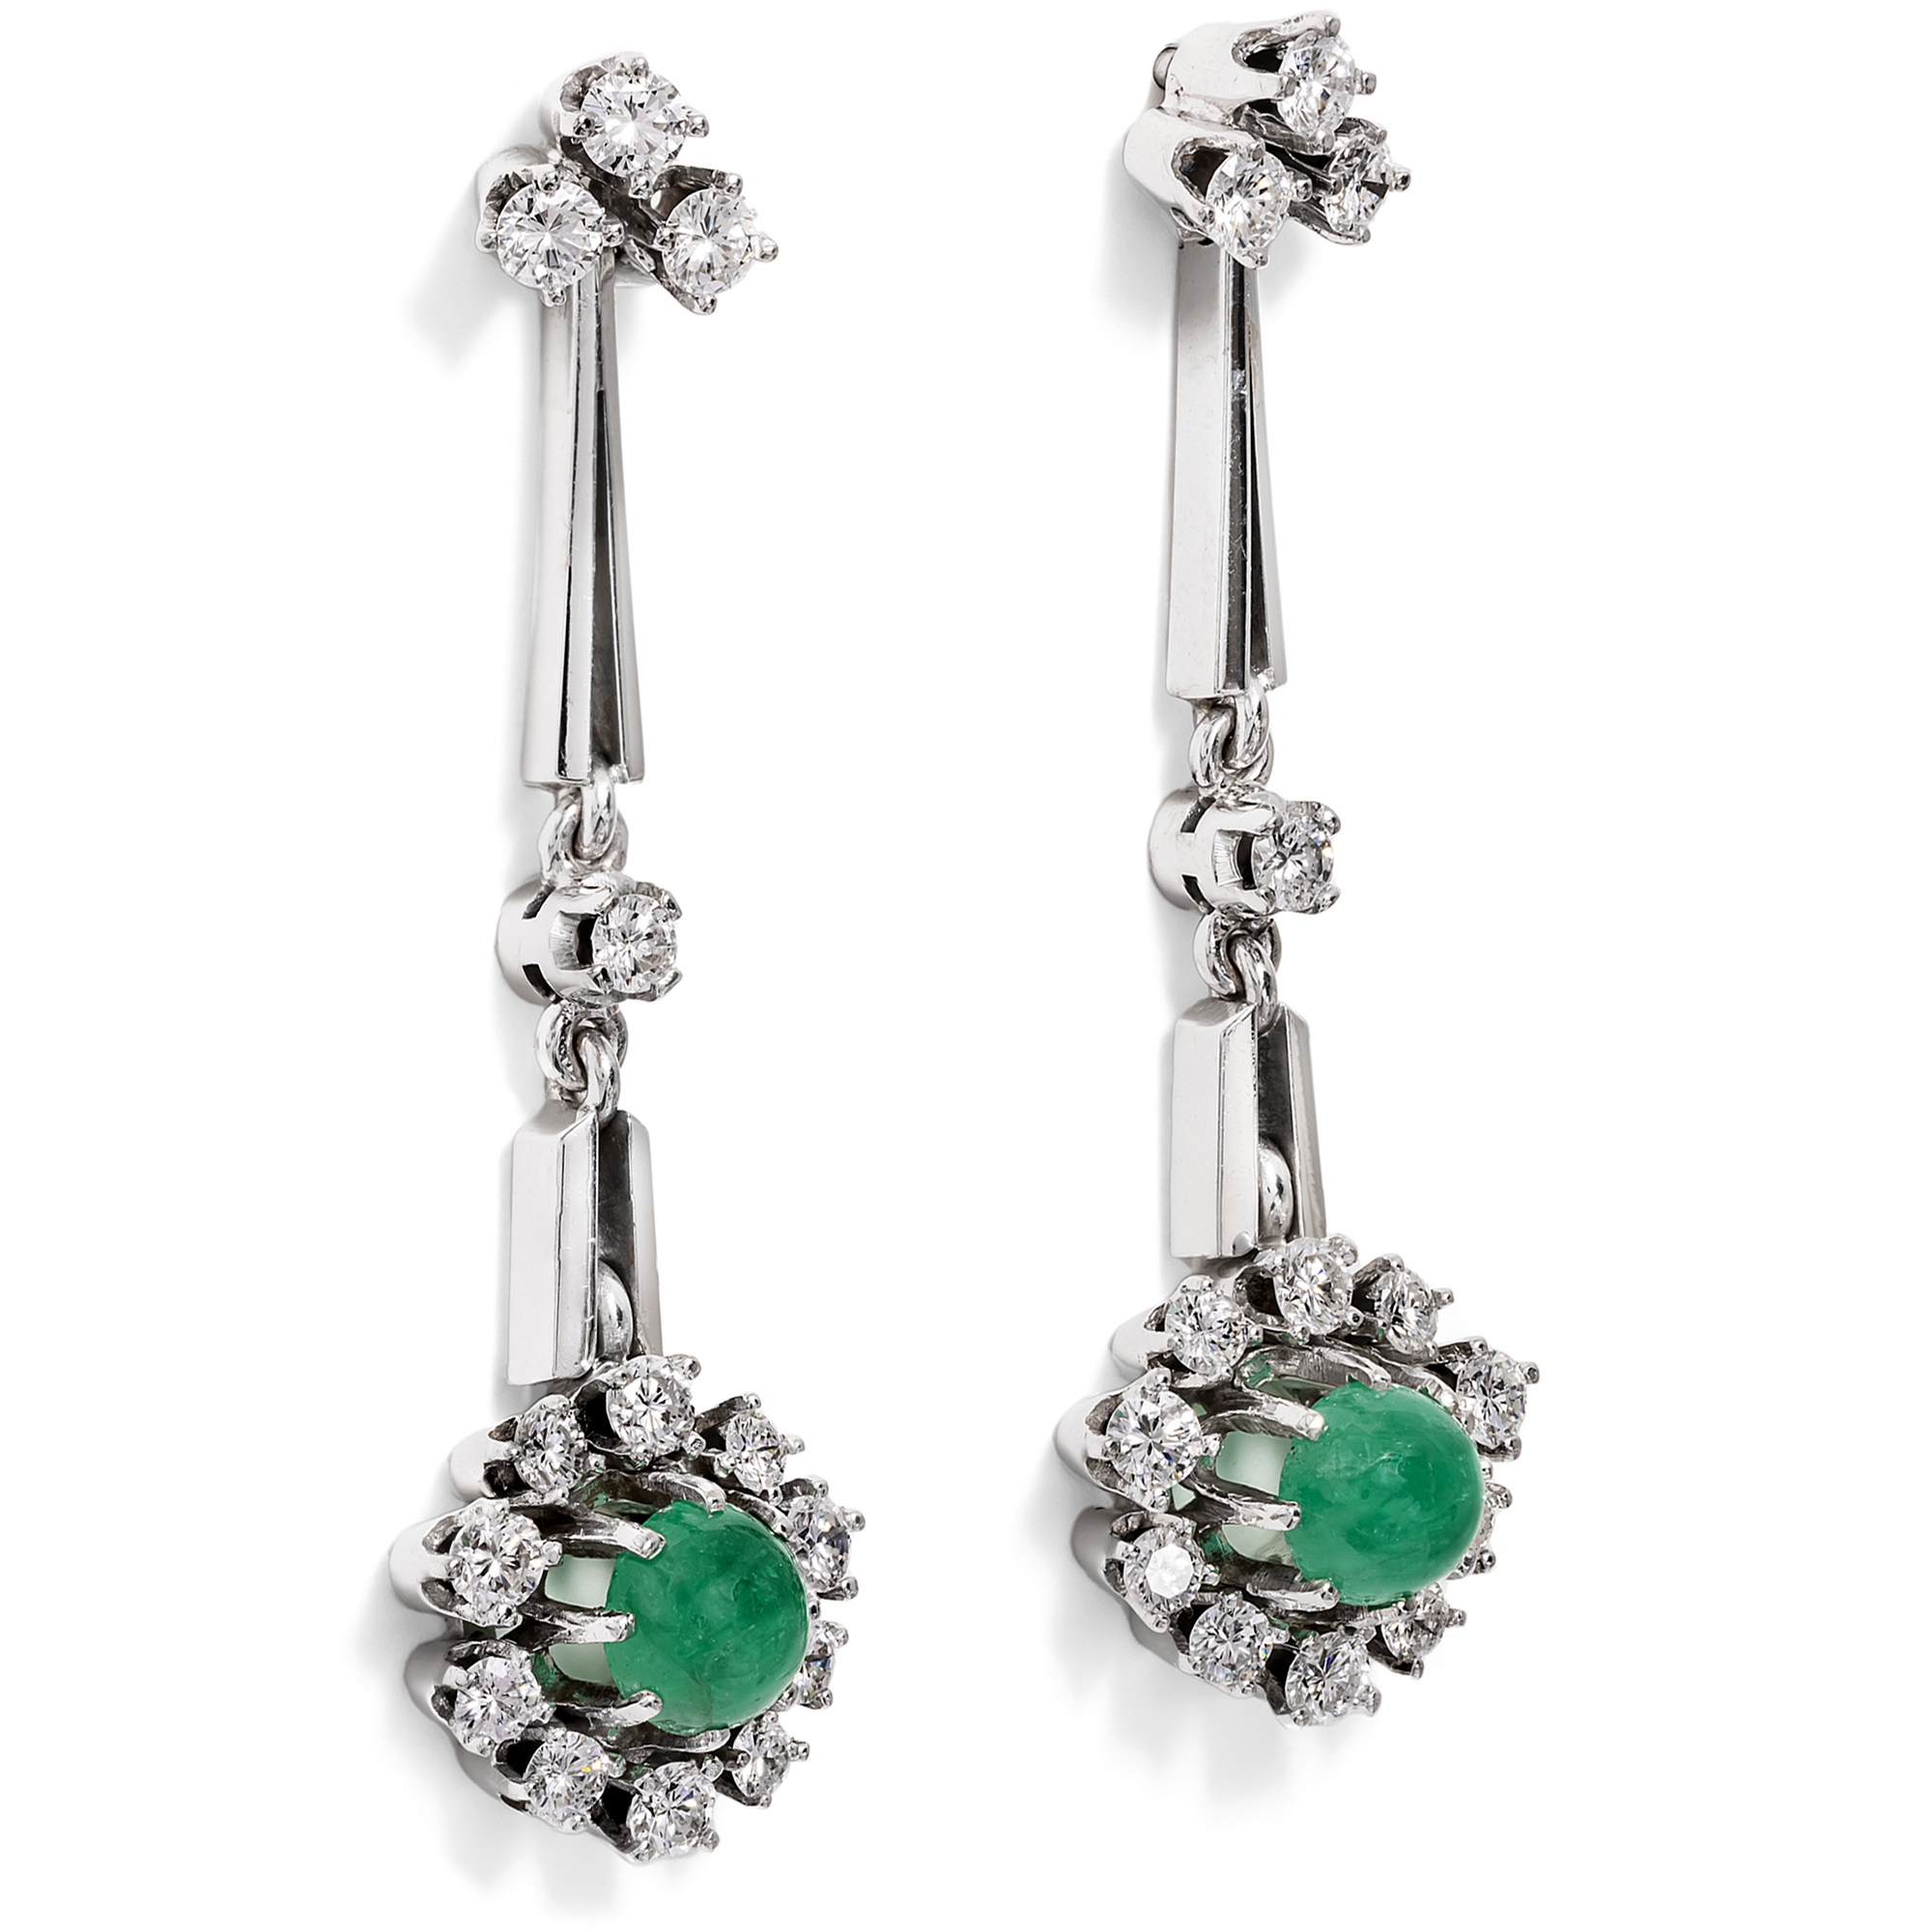 Vintage White Gold Earrings with Emeralds & Diamonds, c. 1975